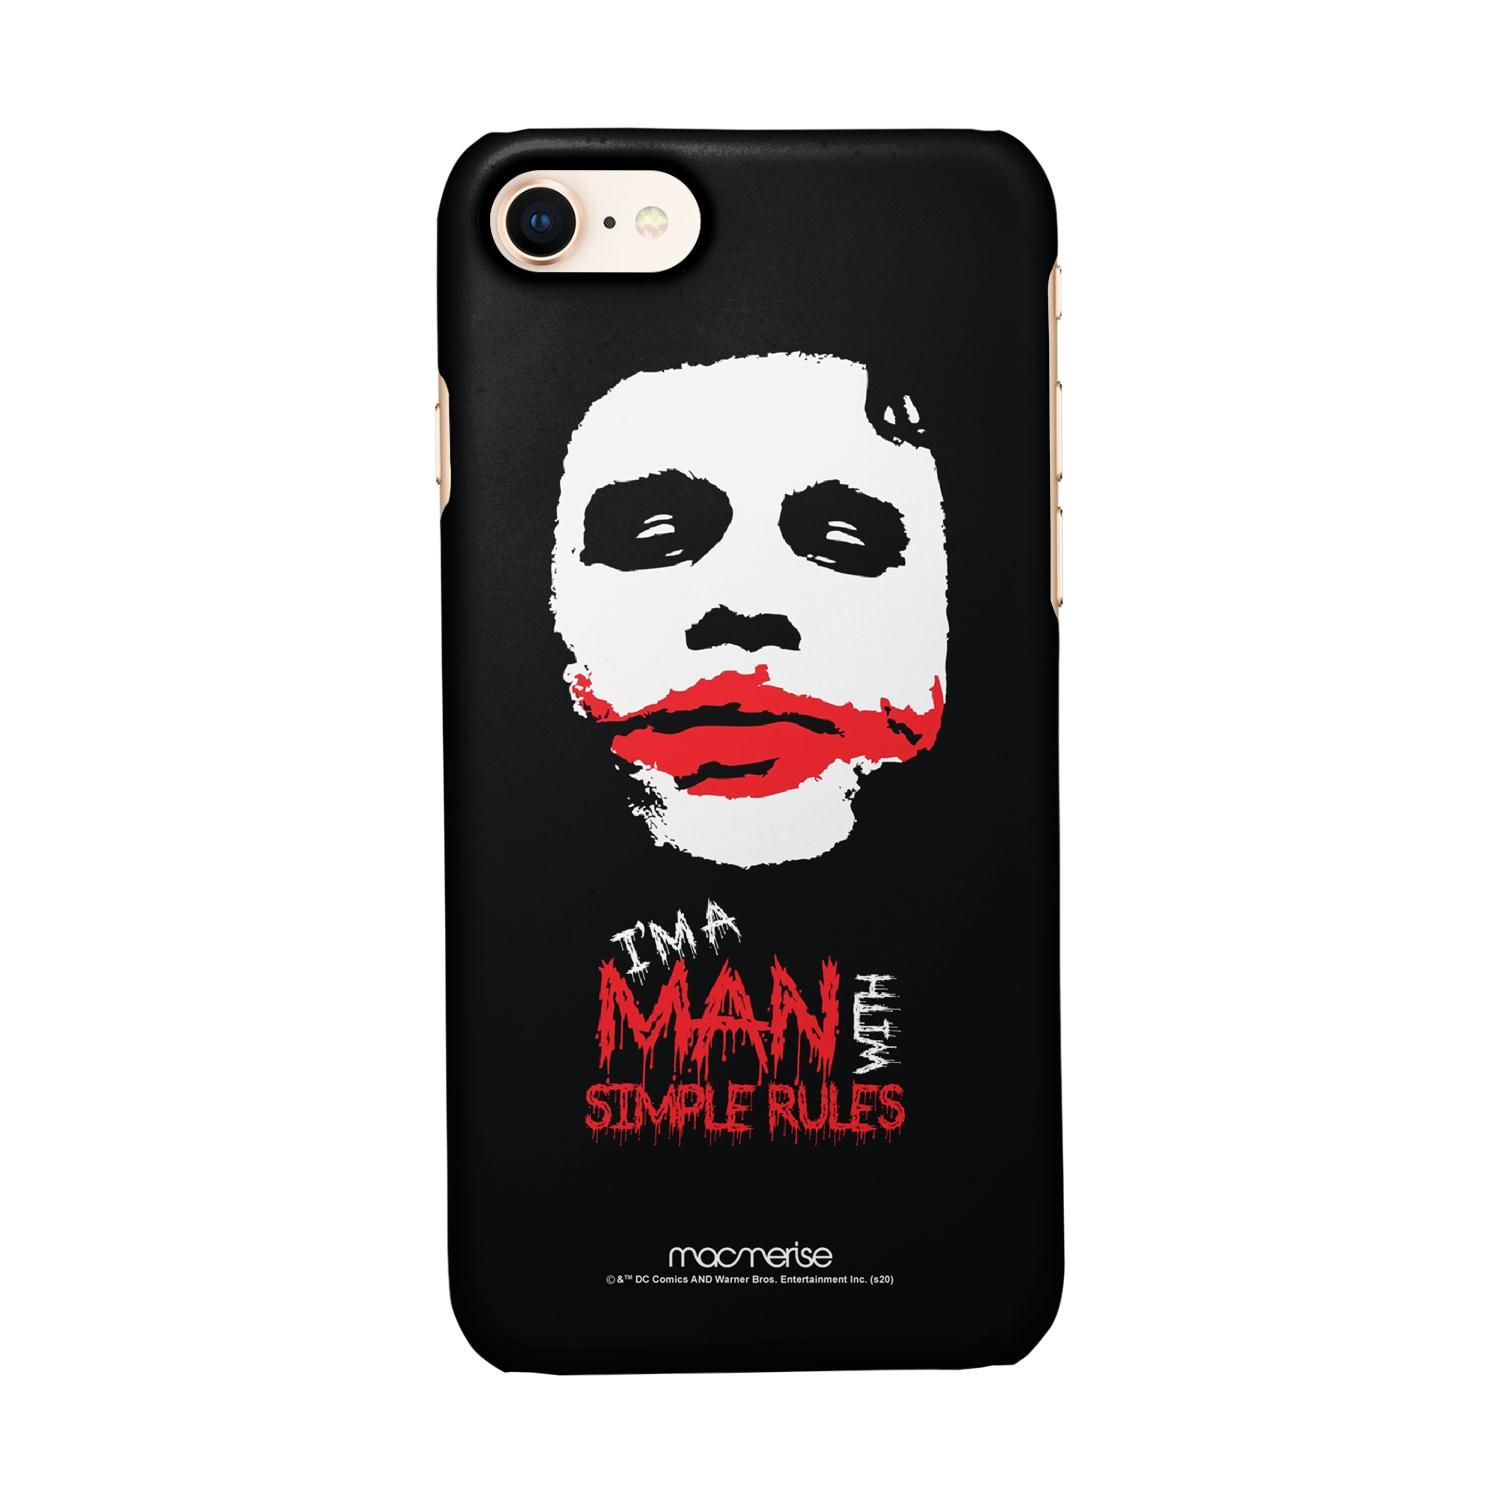 Buy Man With Simple Rules - Sleek Phone Case for iPhone 8 Online